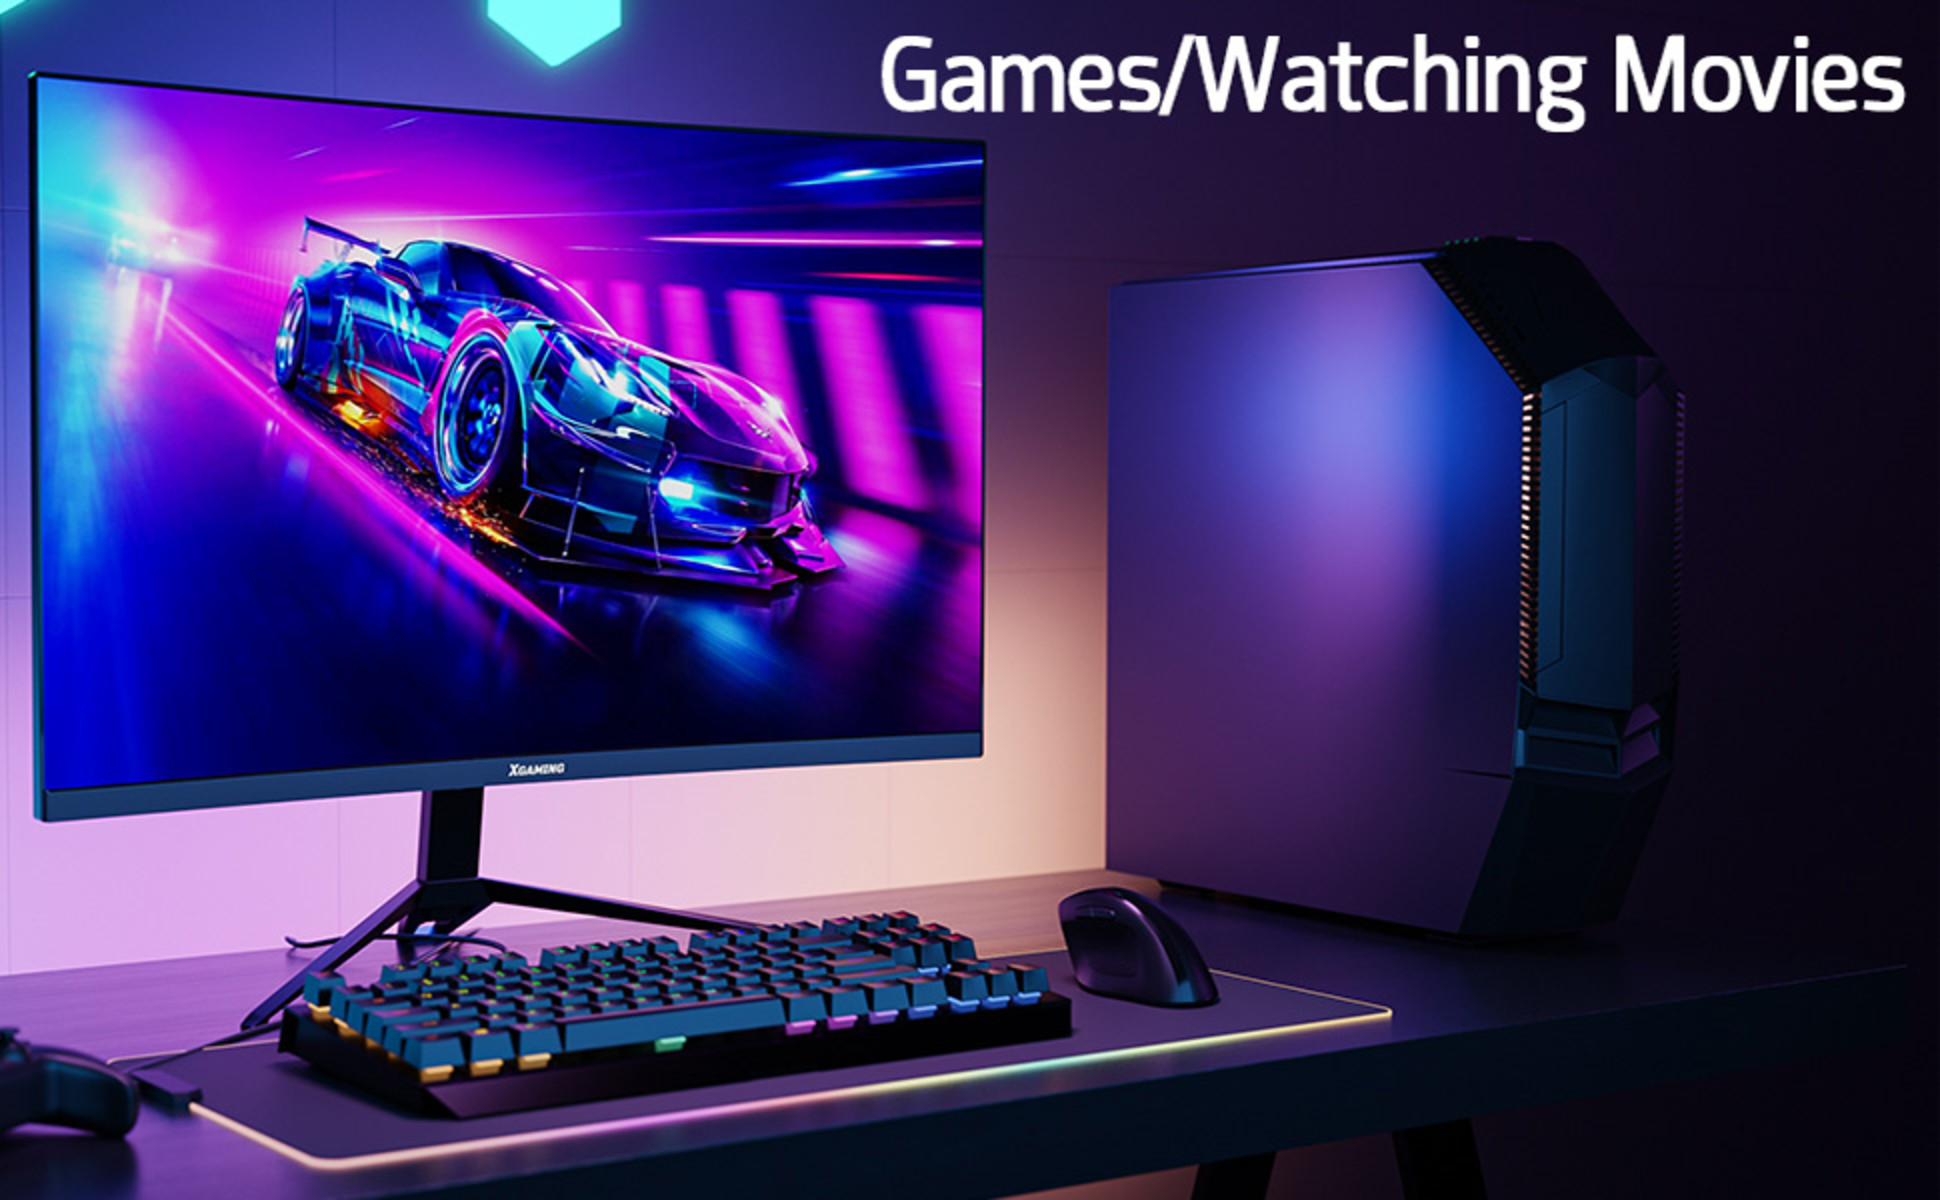 Xgaming 27-inch 165Hz/144Hz Curved Gaming Monitor, Ultra Wide 16:9 1440p PC  Monitor for Laptop with 2*Speakers, 1ms AMD, QHD2K(2560 x 1440p) HDR